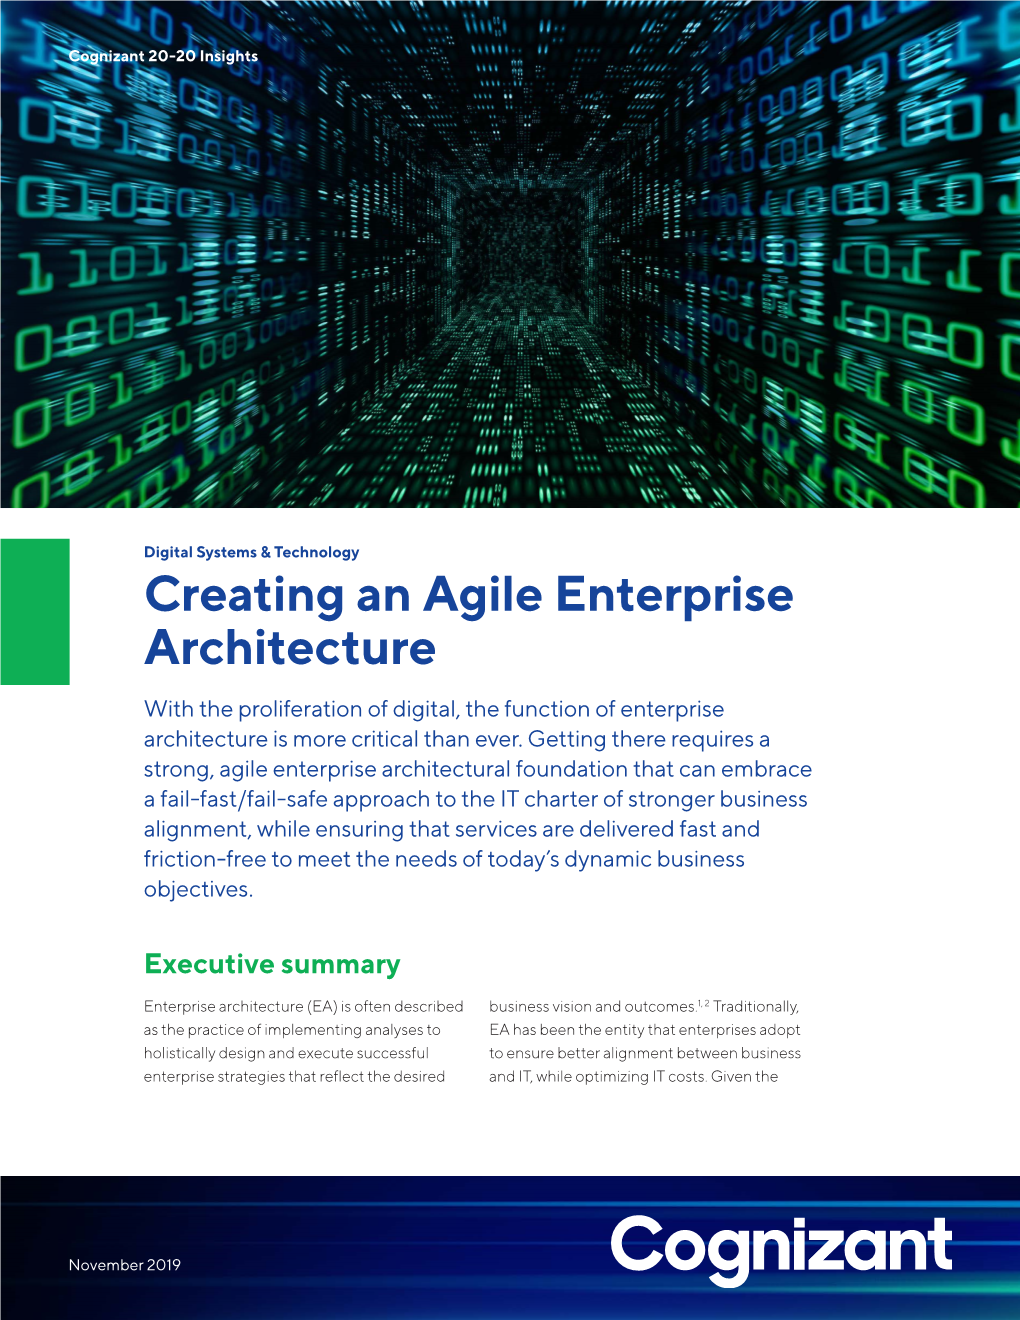 Creating an Agile Enterprise Architecture with the Proliferation of Digital, the Function of Enterprise Architecture Is More Critical Than Ever